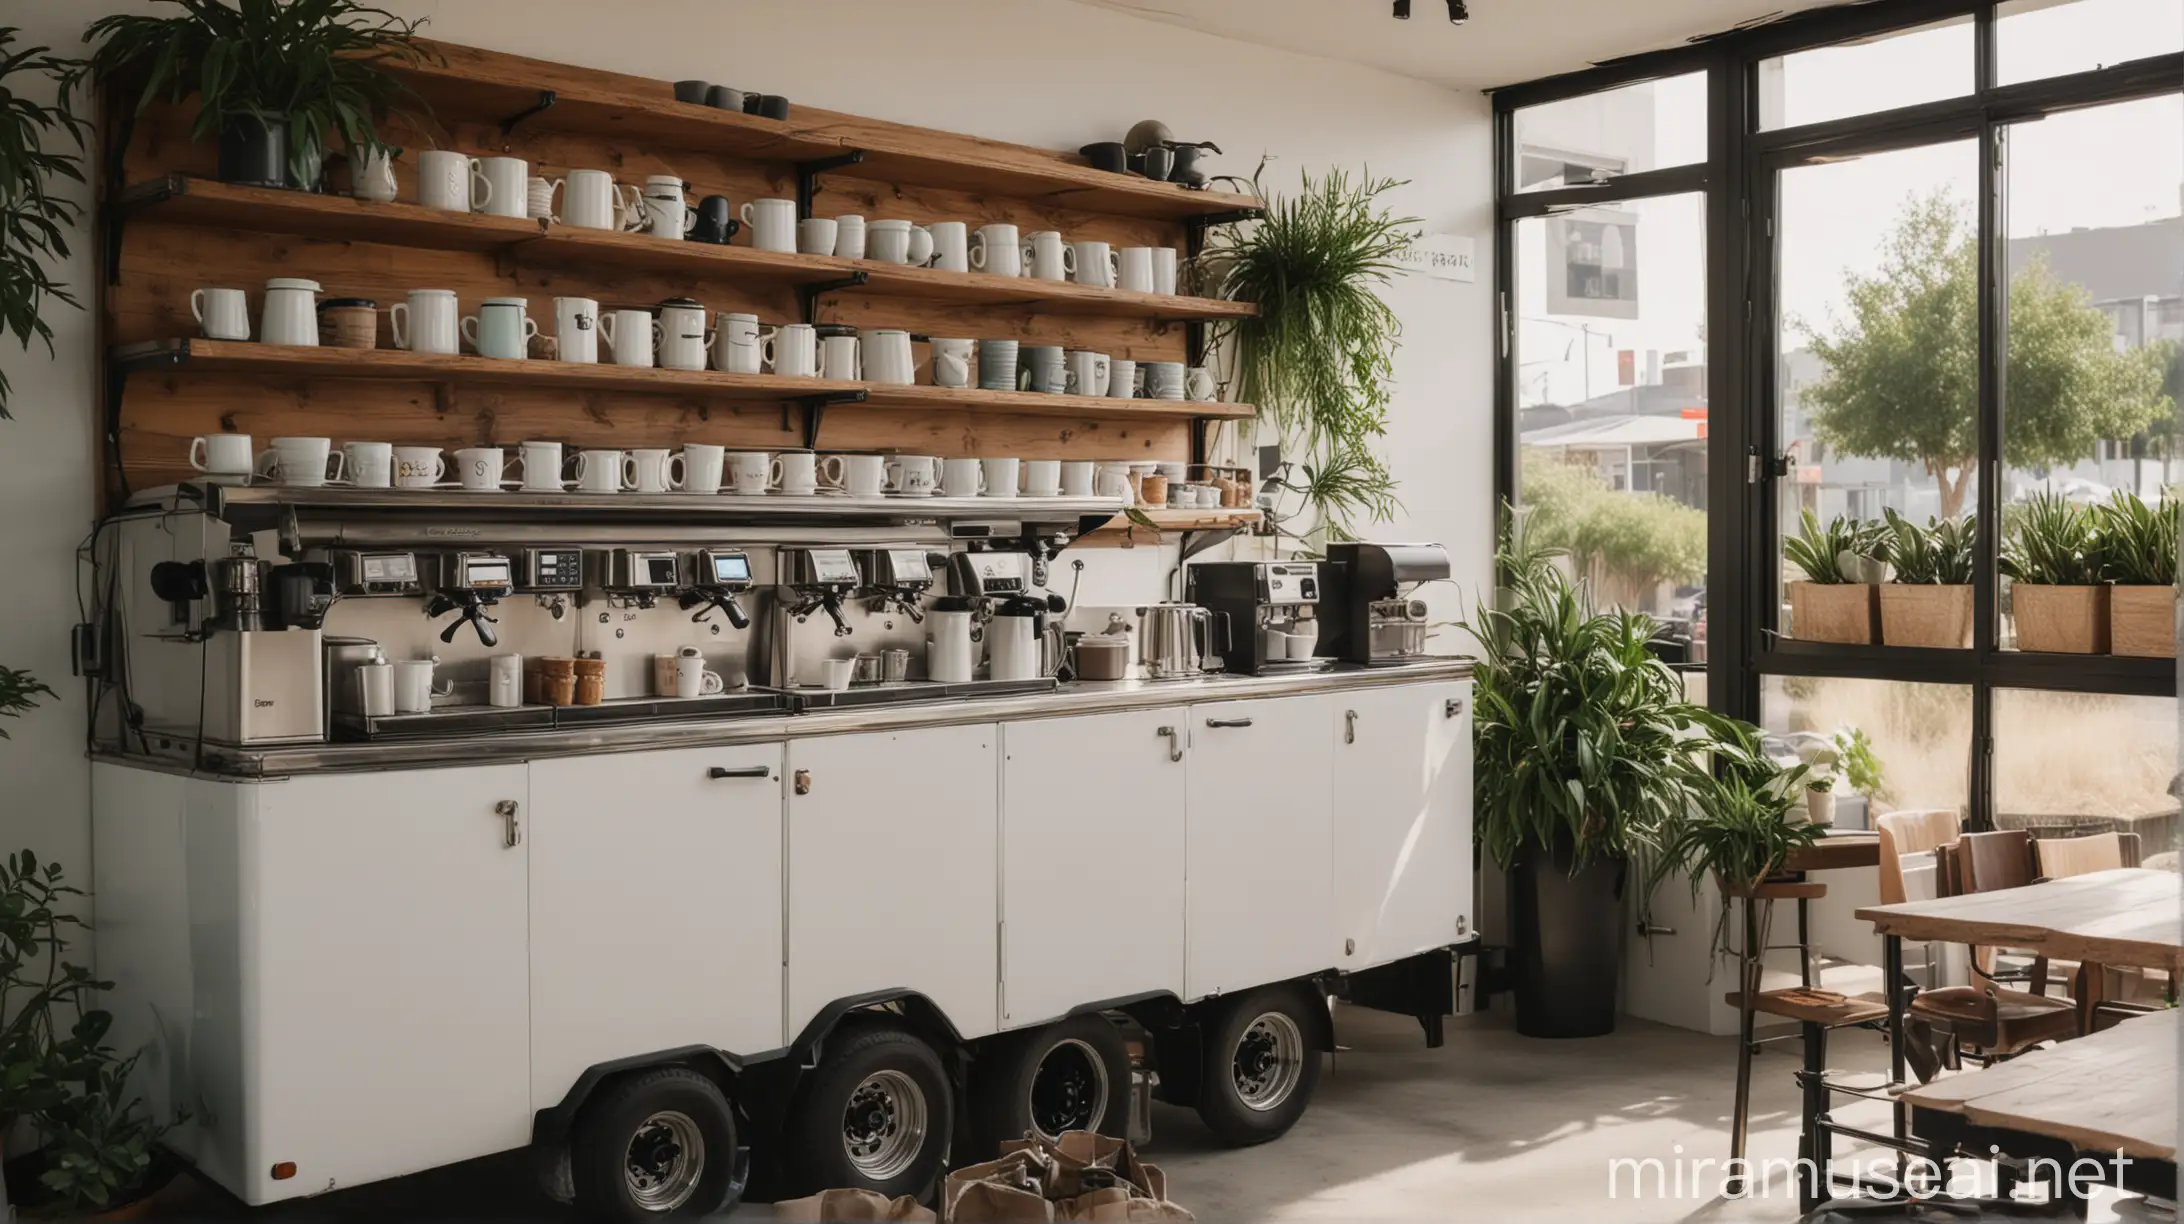 A wide-angle shot (taken with a Canon EOS 5D Mark IV) capturing the warm, natural light streaming through the open side of a sleek white coffee truck. The interior is minimal, featuring a polished stainless steel espresso machine and a few rustic wooden shelves holding minimalist ceramic mugs. A single, vibrant green plant adds a touch of life.